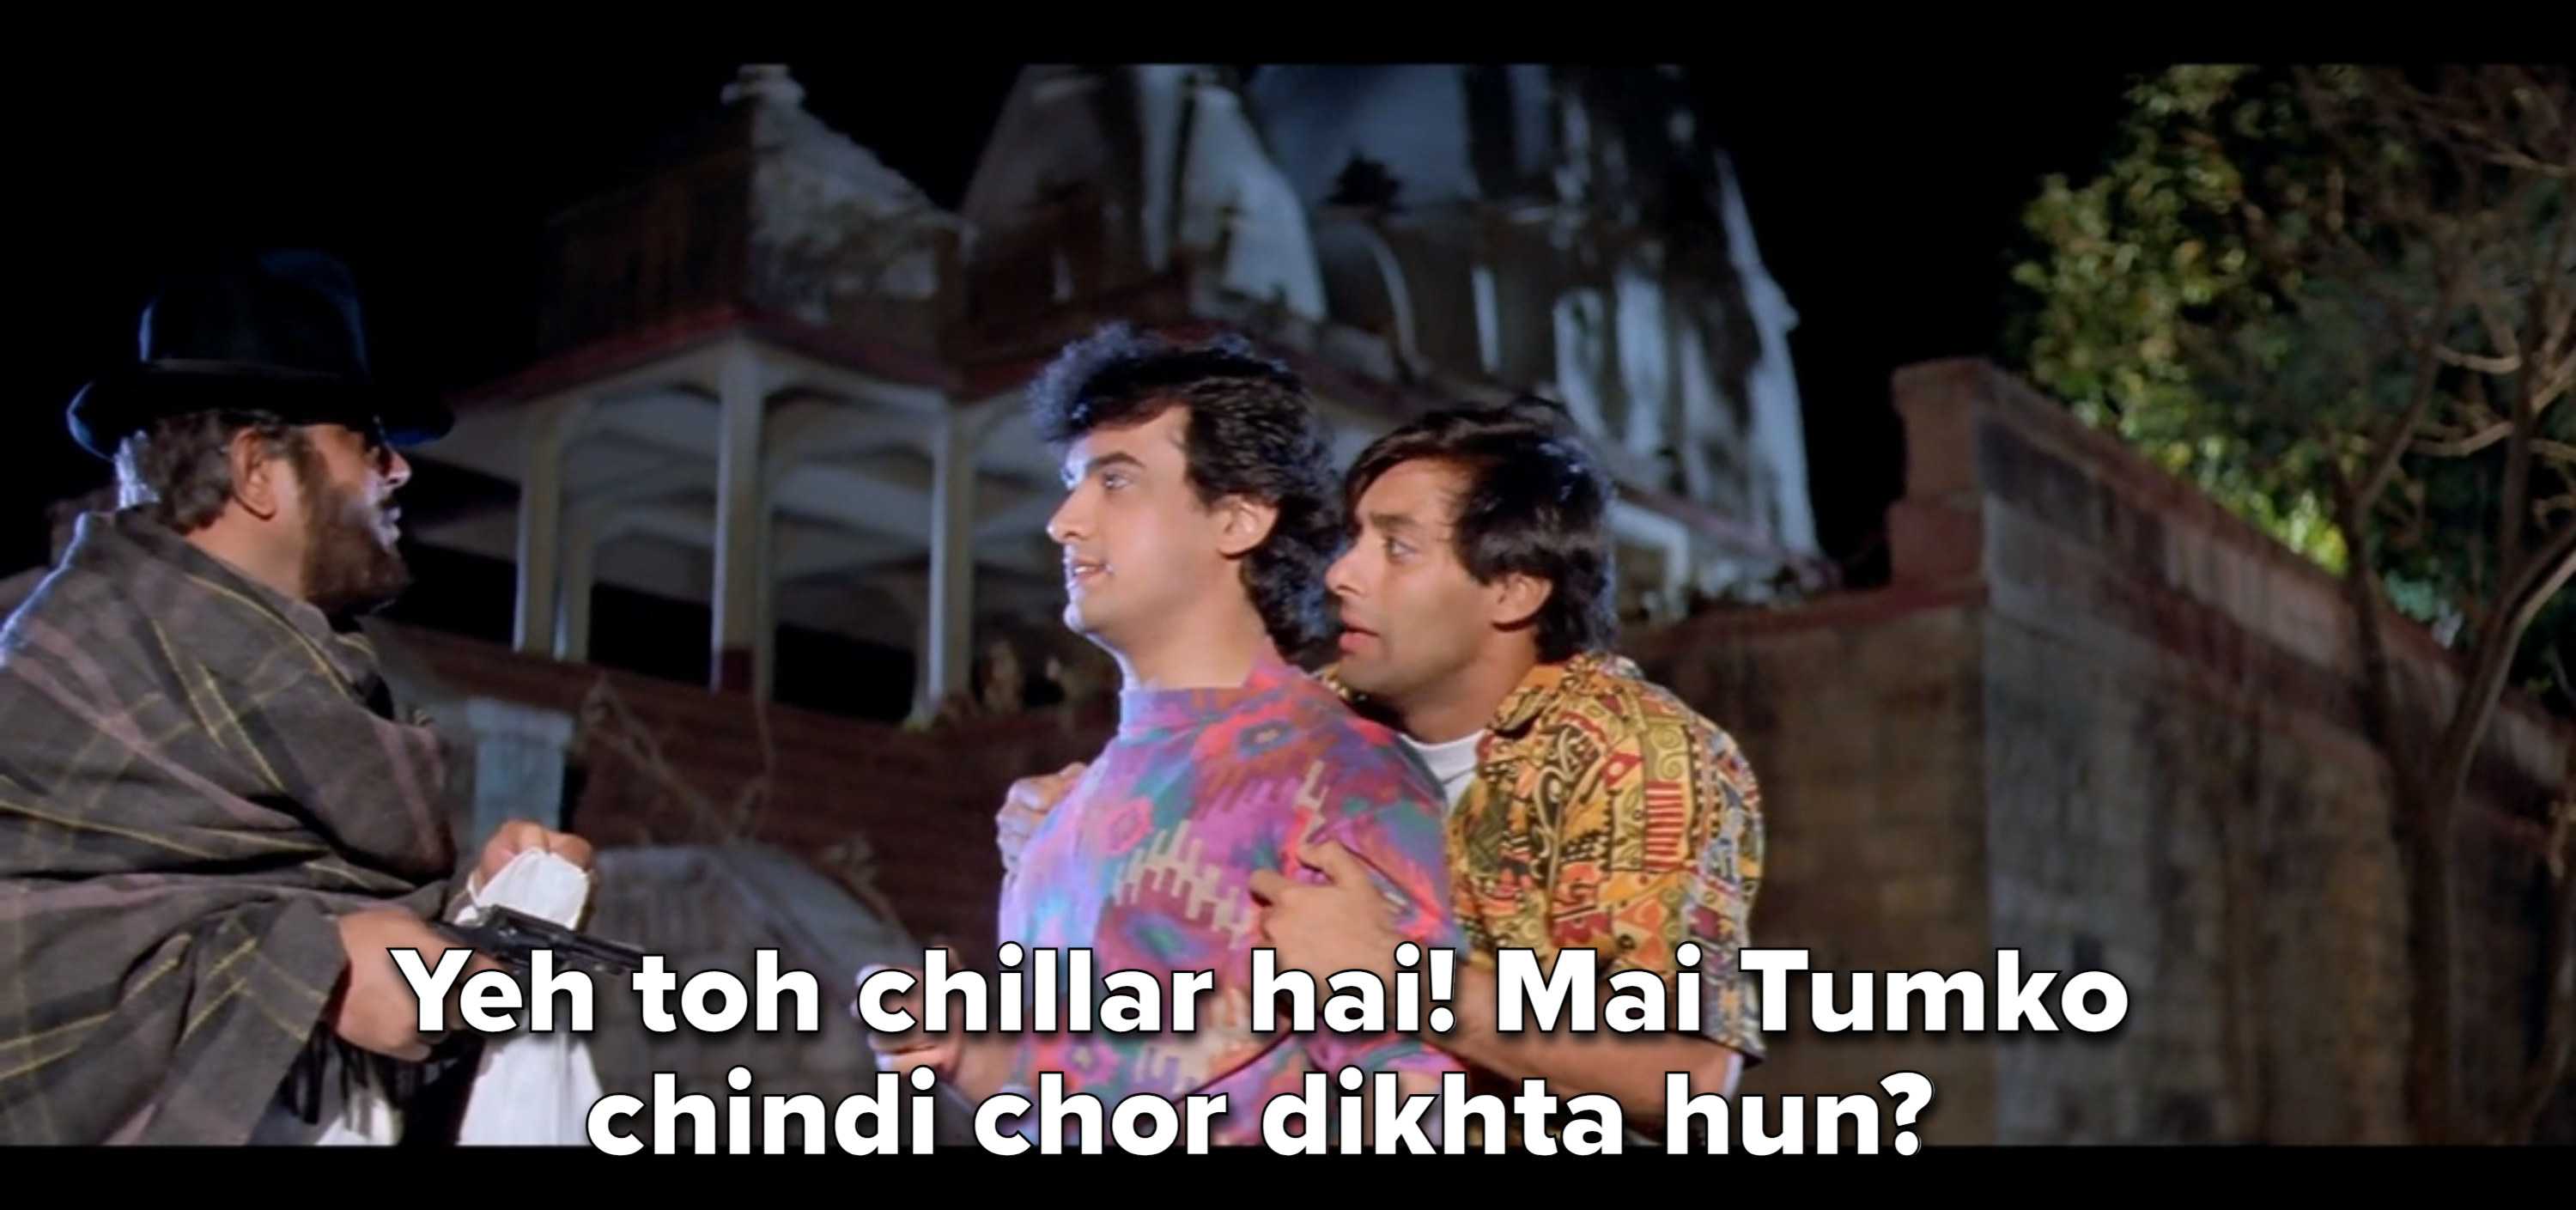 Amar, Prem and Teja looking at each other